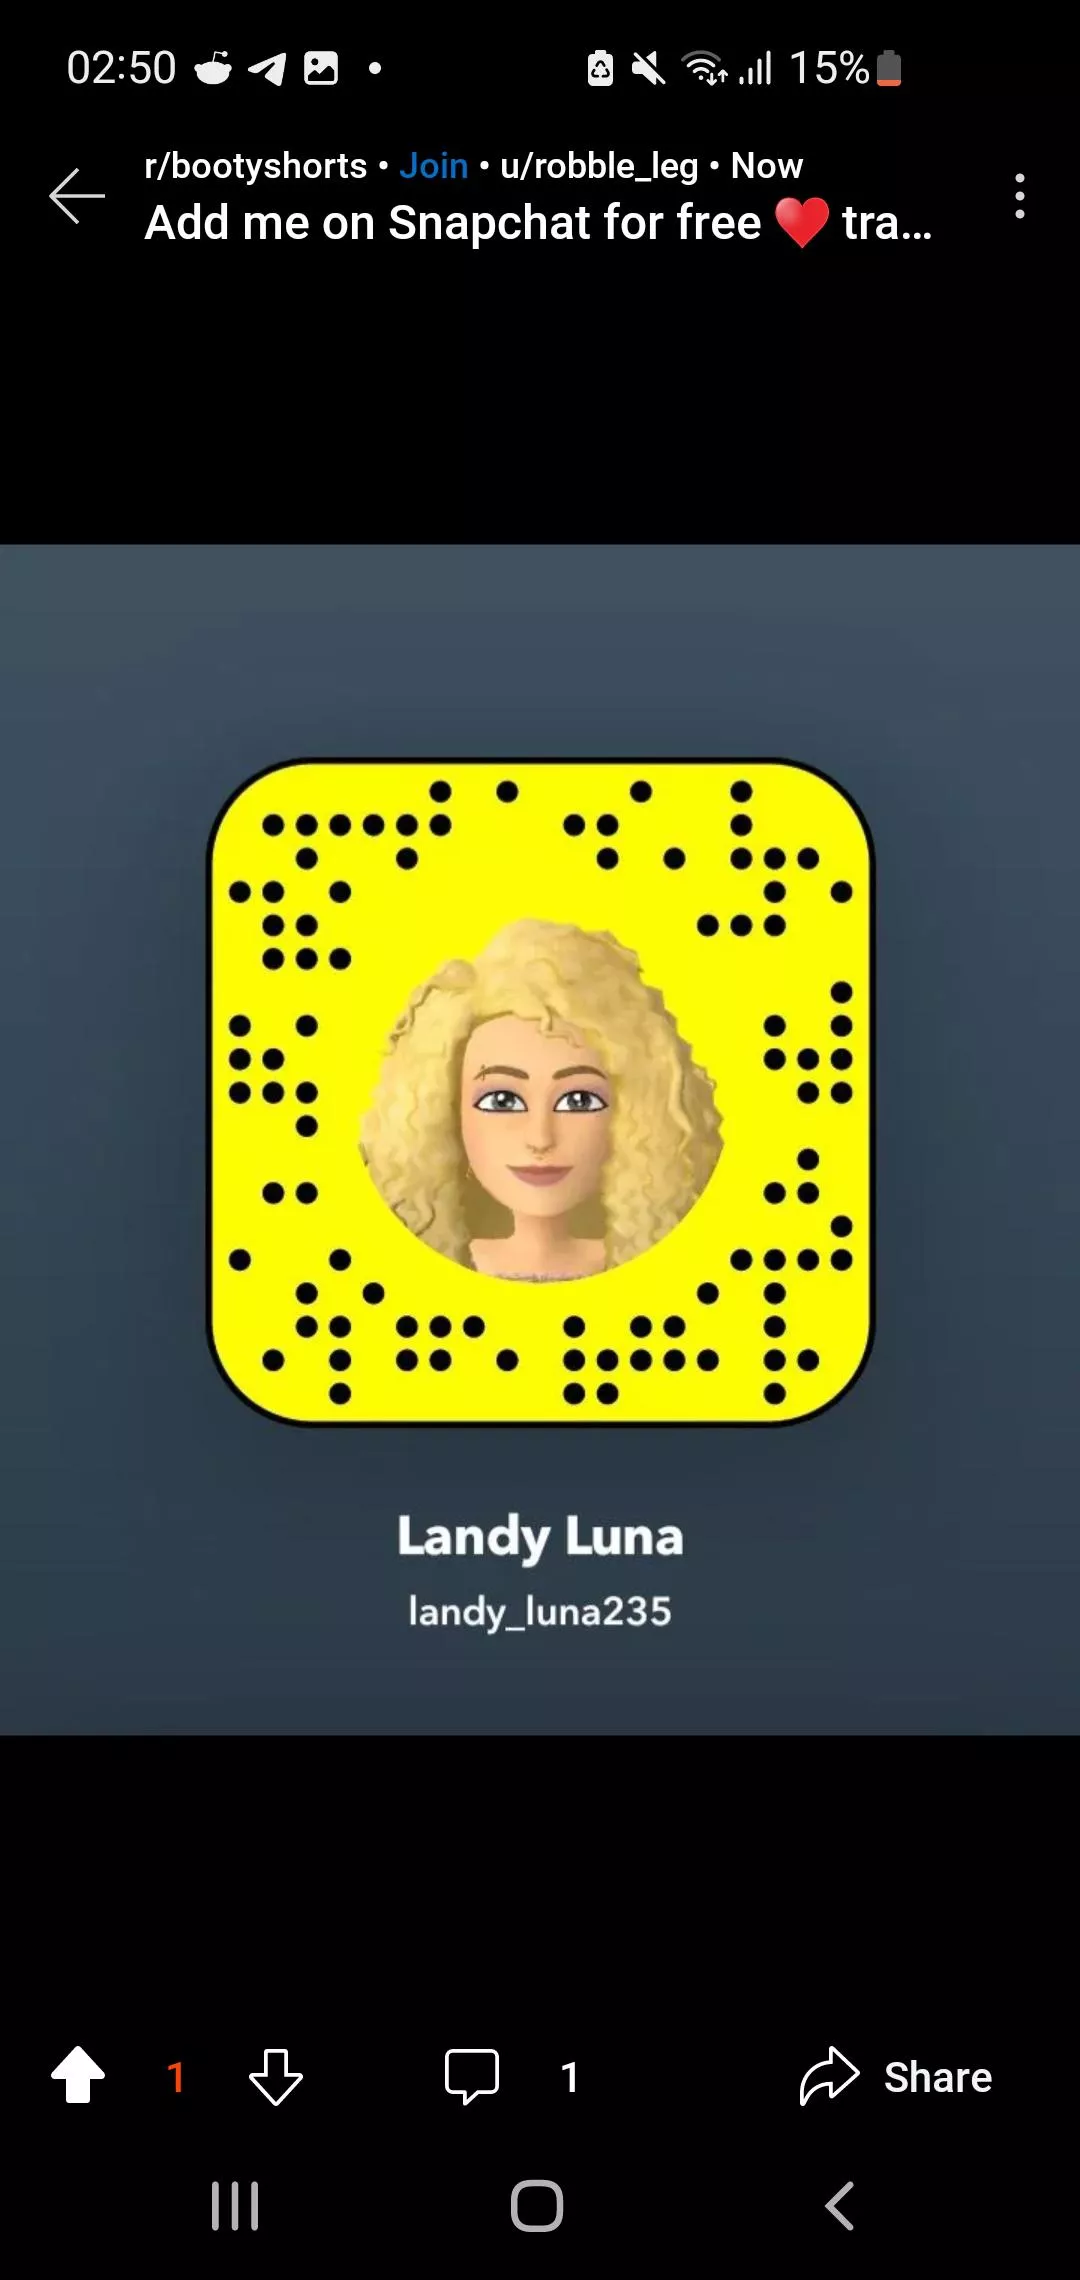 Add me on Snapchat for free ♥️ trade nude and free😙 fun video #horny #nsfw #porn #sex #masturbating🍑🍌 #fingering #onlyfans #cum #sexting #dmme #buyingcontent #nudes #lesbian #nude #squirting #wet #pussy nudes  bilde bilde